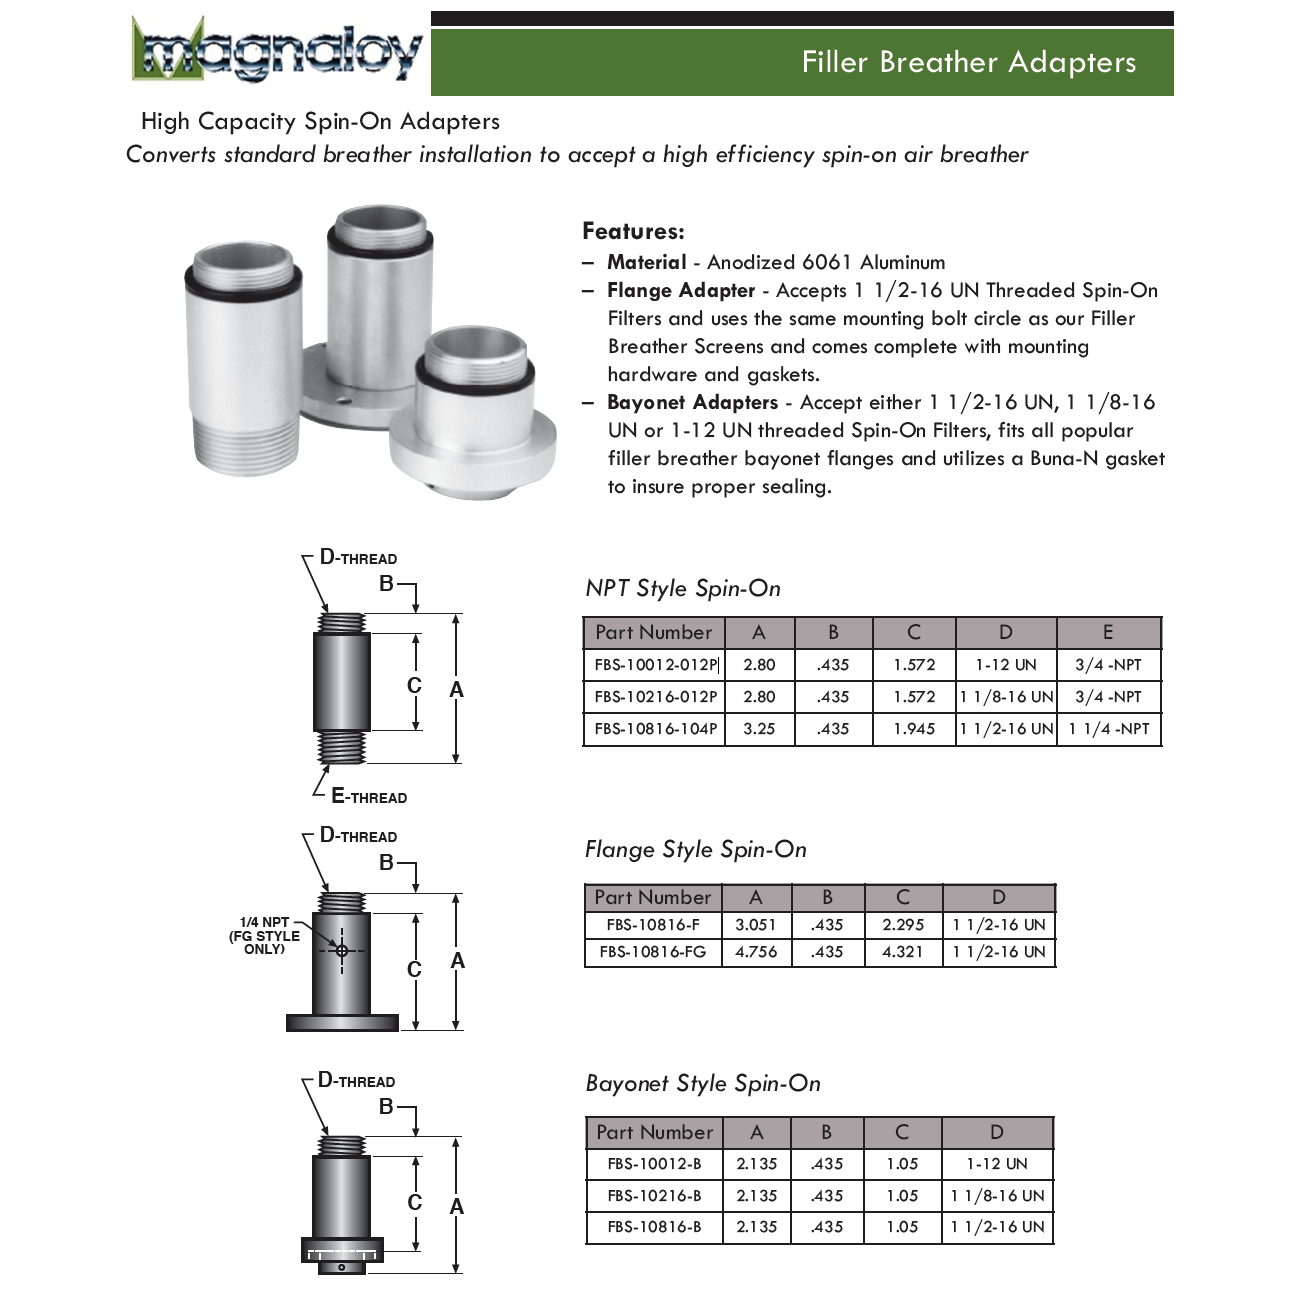 FBS-10816-FG : Magnaloy Spin-On Flange Adapter, Aluminum, Flange to 1 1/2-16 UN, with Gauge Port